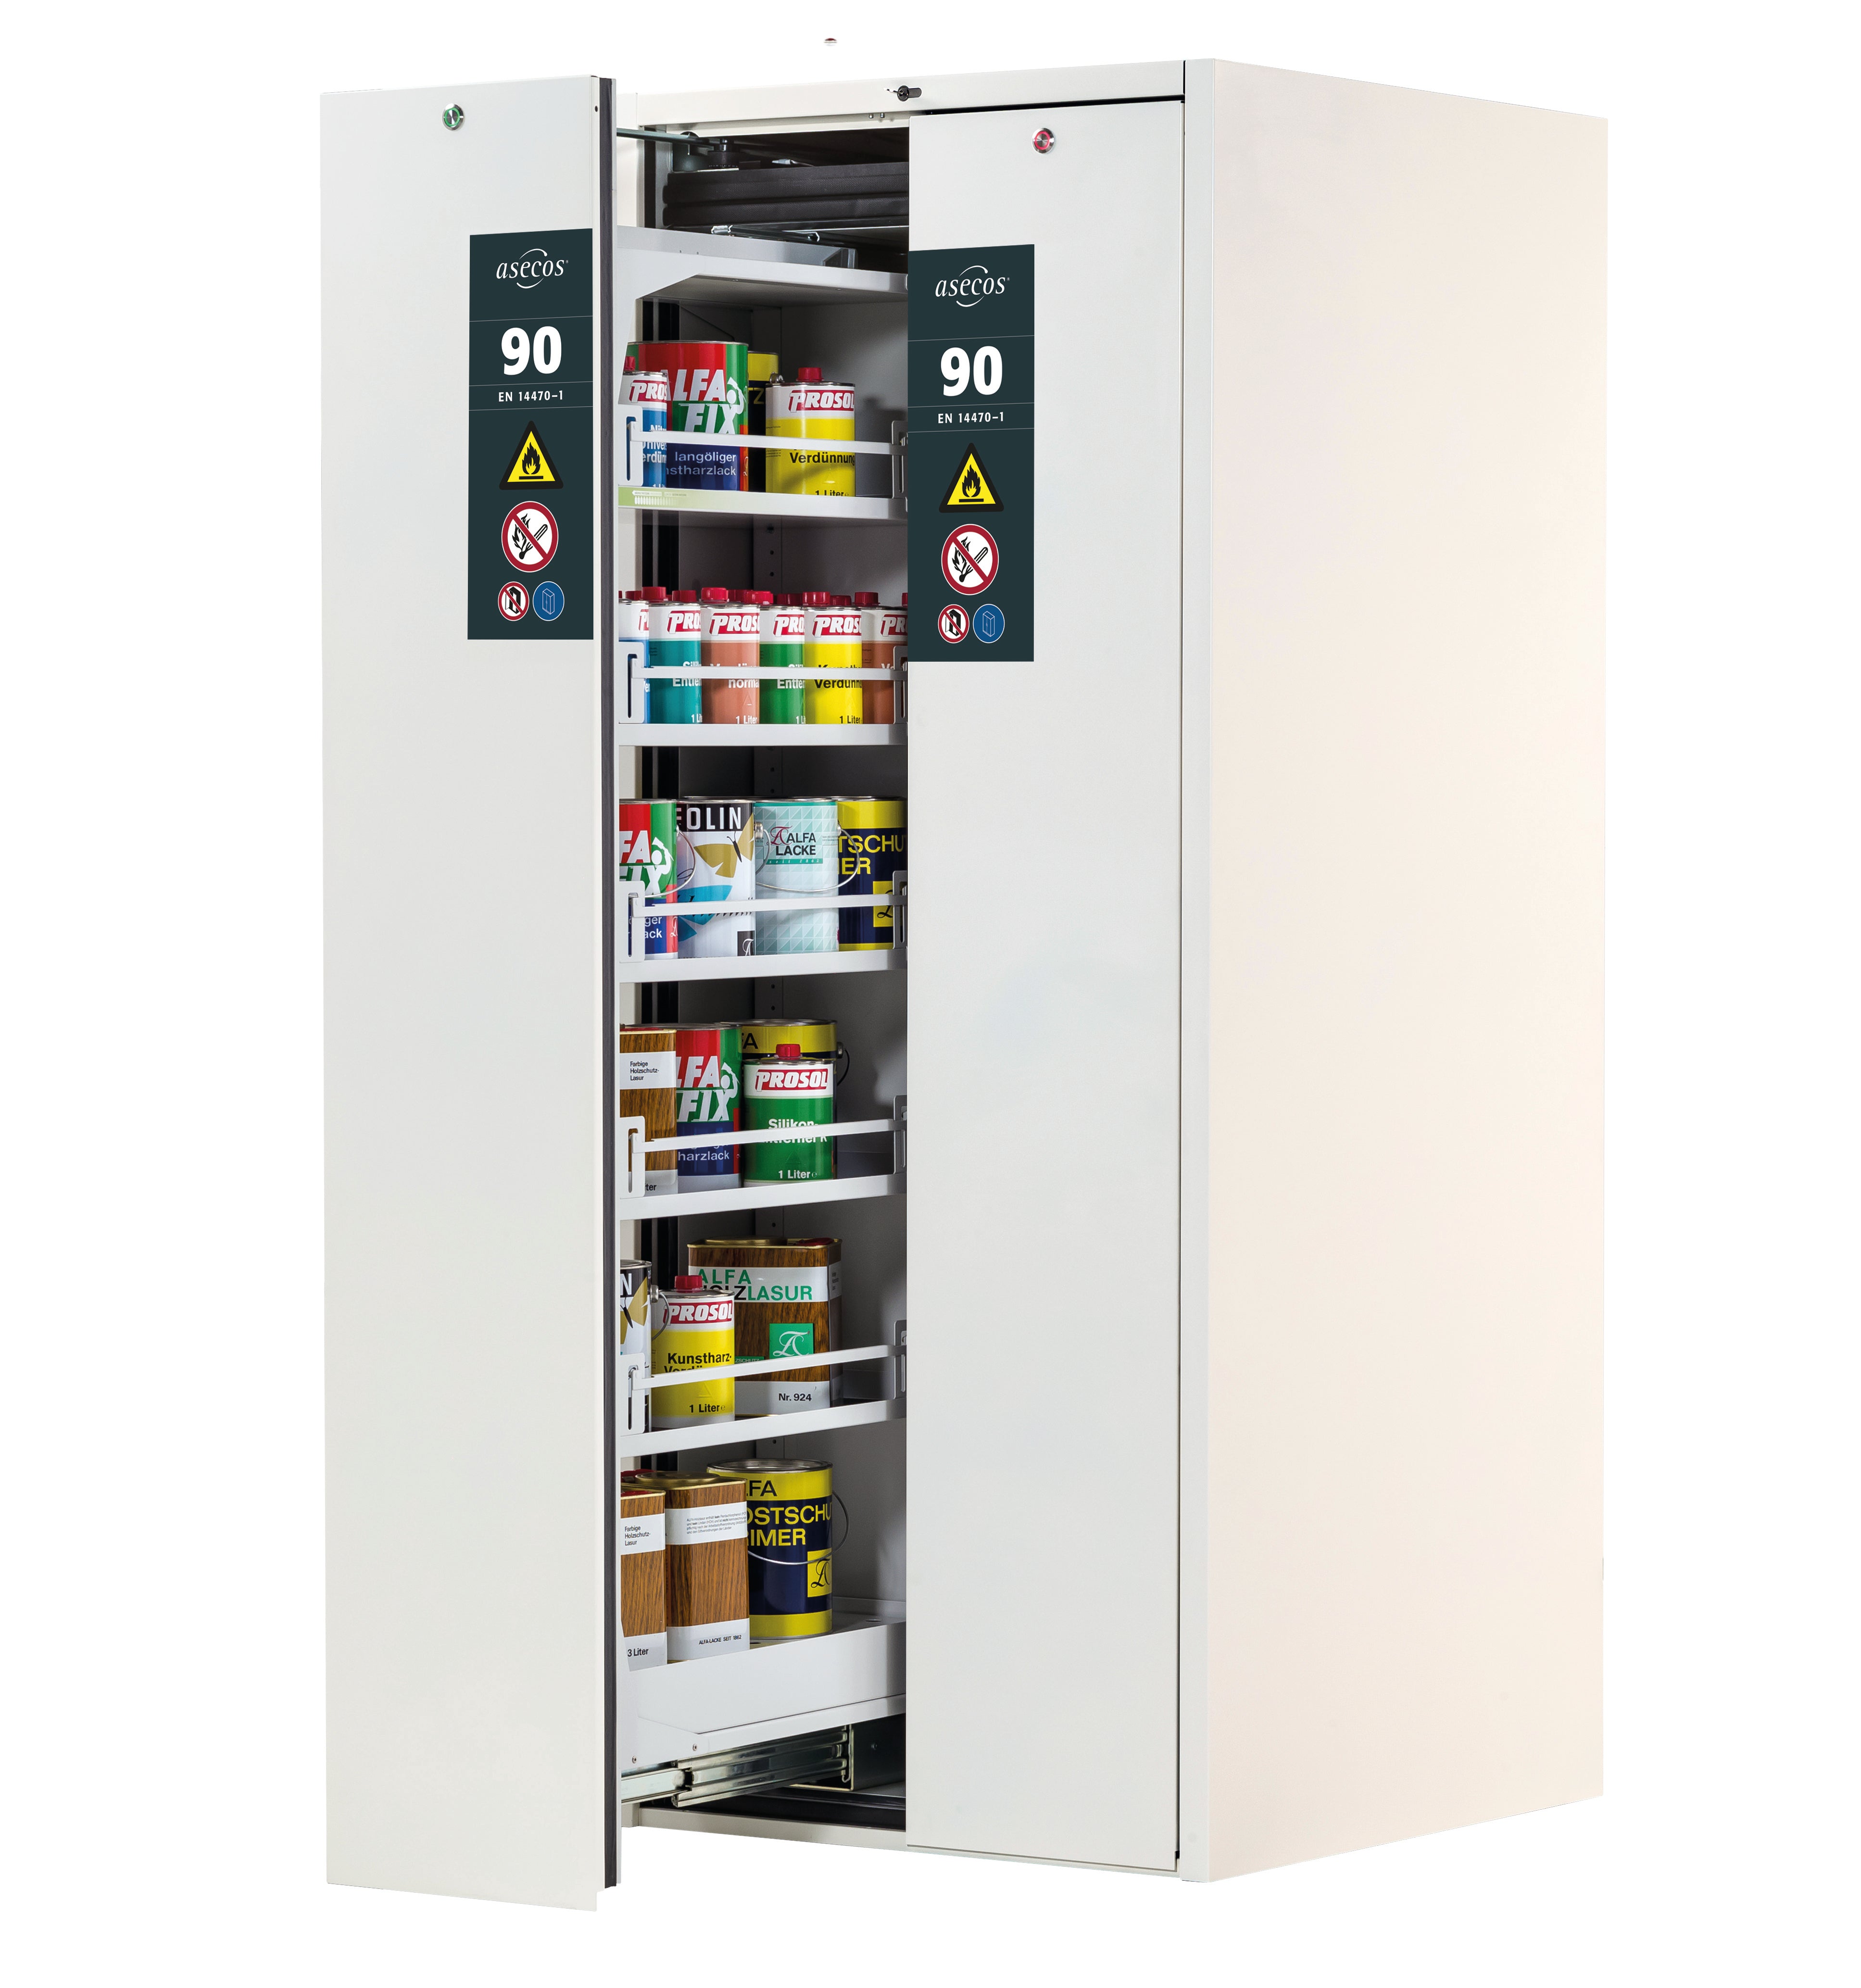 Type 90 safety cabinet V-MOVE-90 model V90.196.081.VDAC:0012 in laboratory white (similar to RAL 9016) with 5x standard shelves (sheet steel)